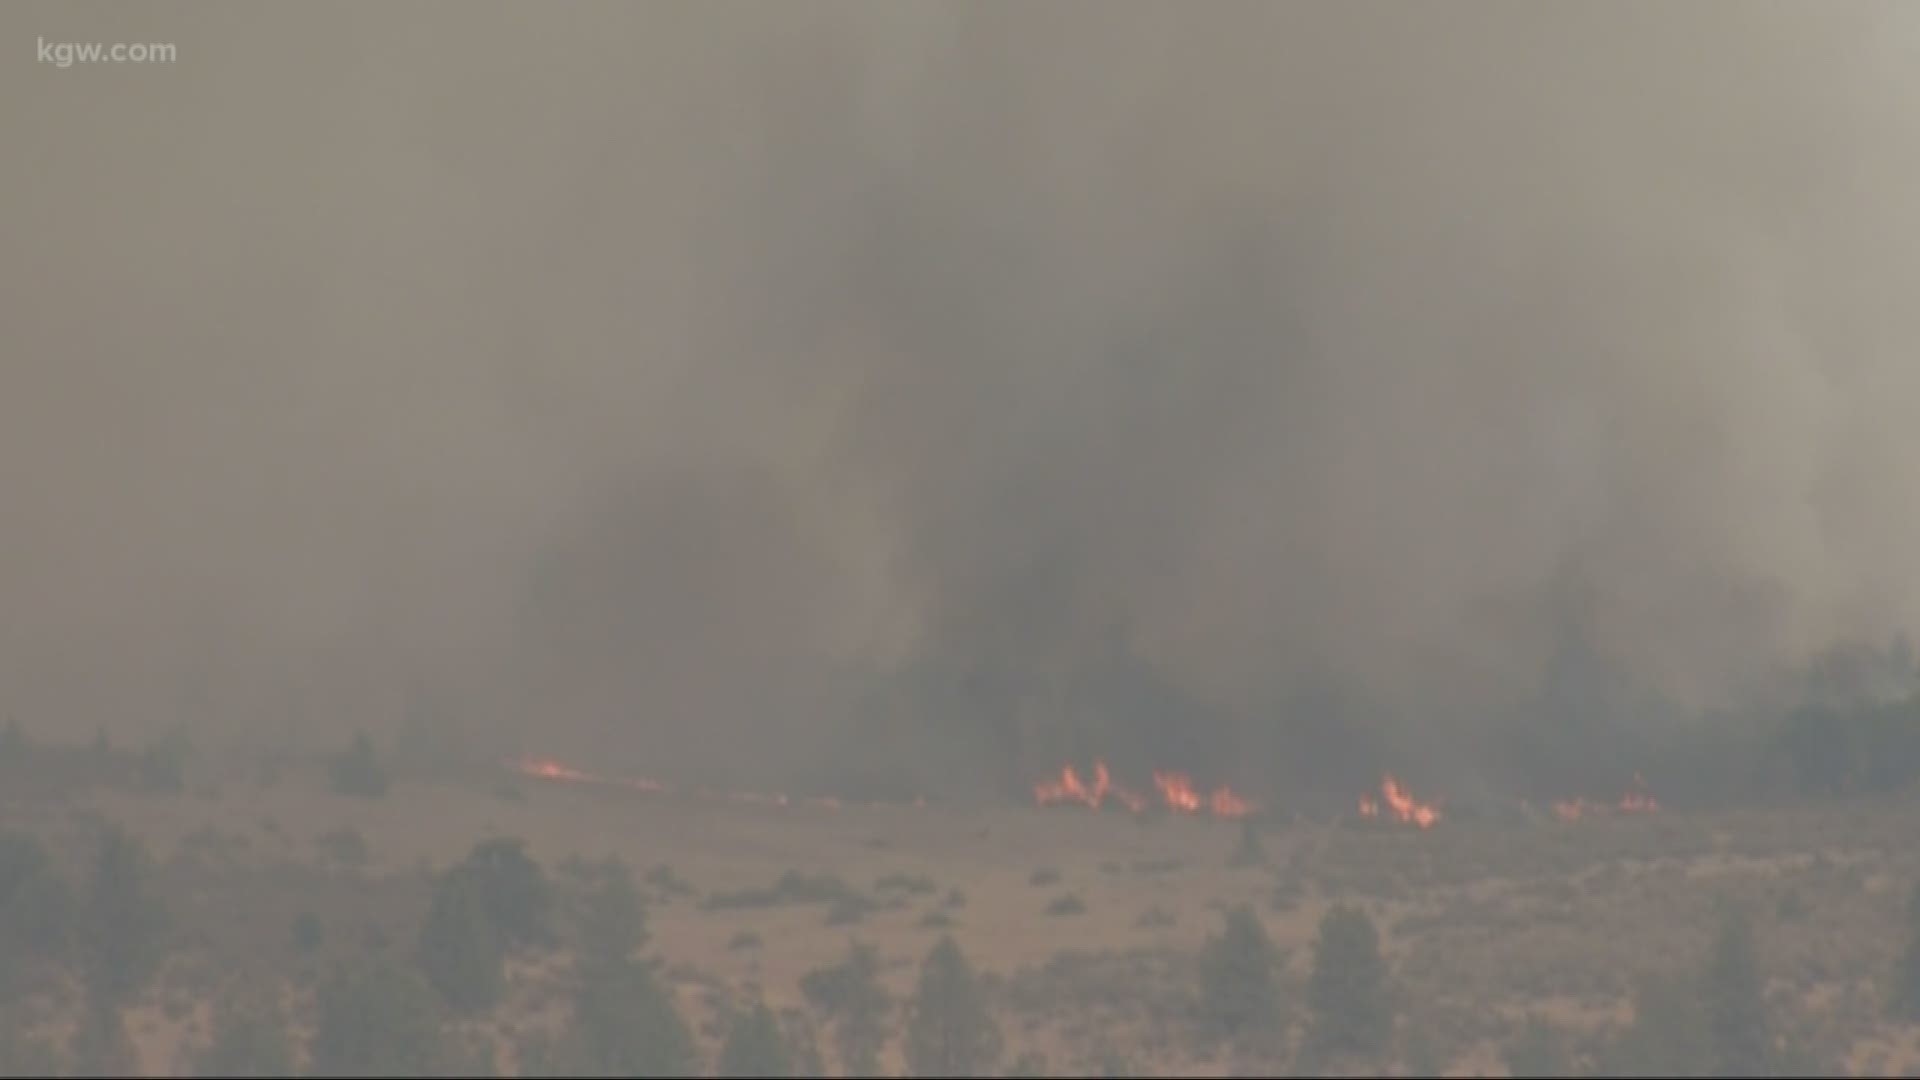 The South Valley Fire burning near Dufur has threatened about 100 homes.